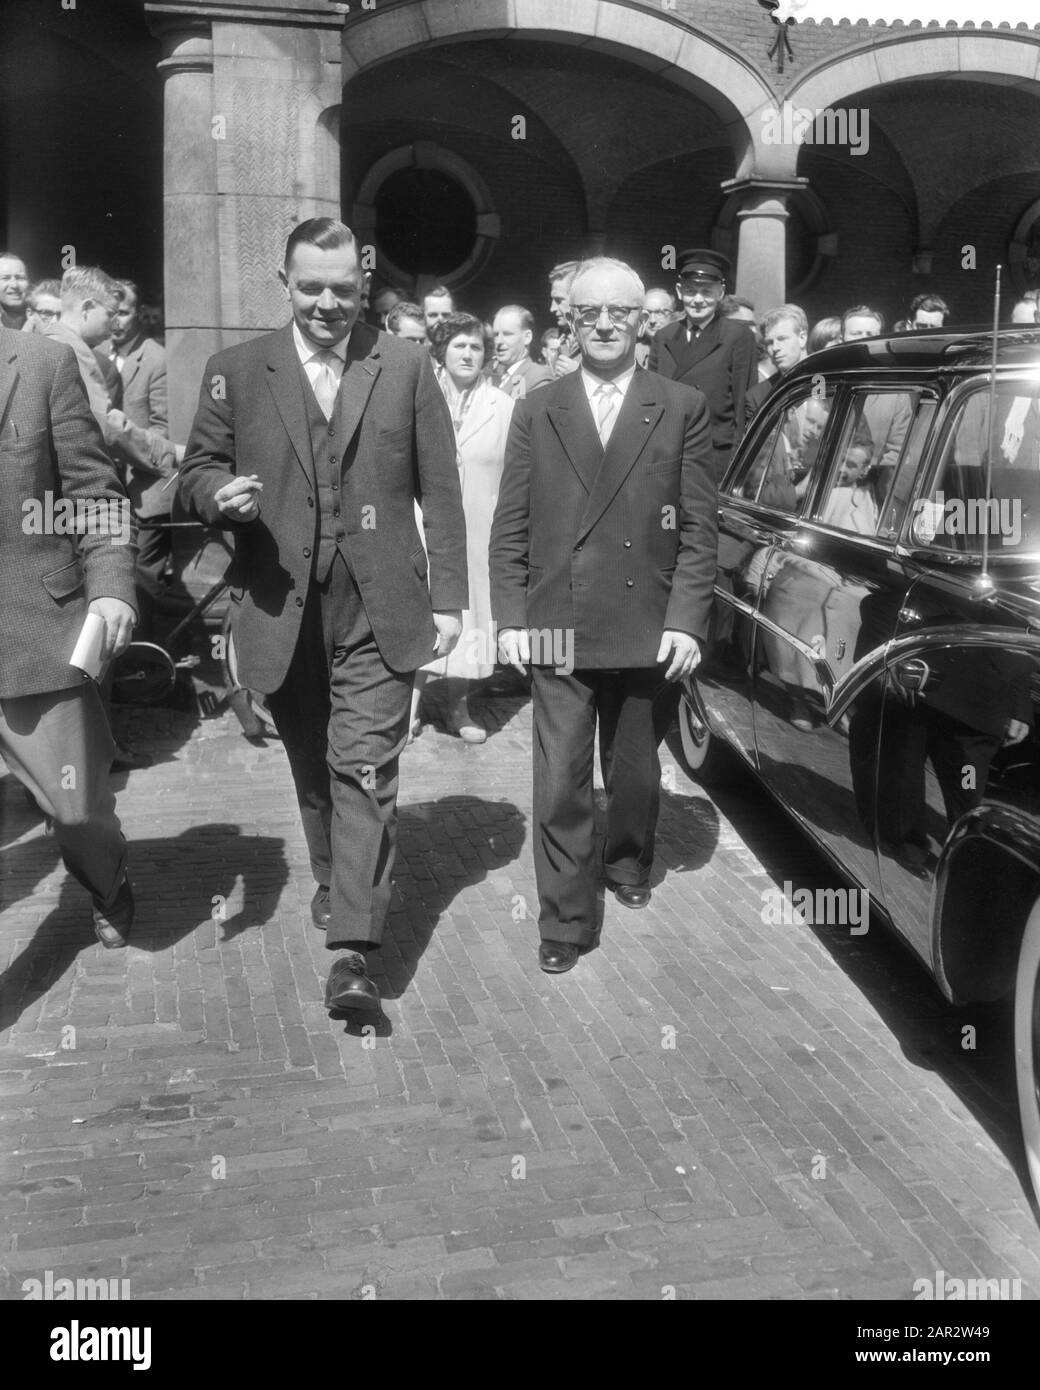 Professor De Quay receives the chairman of the CNV Mr. C. J. Van Mastrigt (left) and the chairman of the CHU mr. H. K. J. Beernink Date: April 20, 1959 Stock Photo